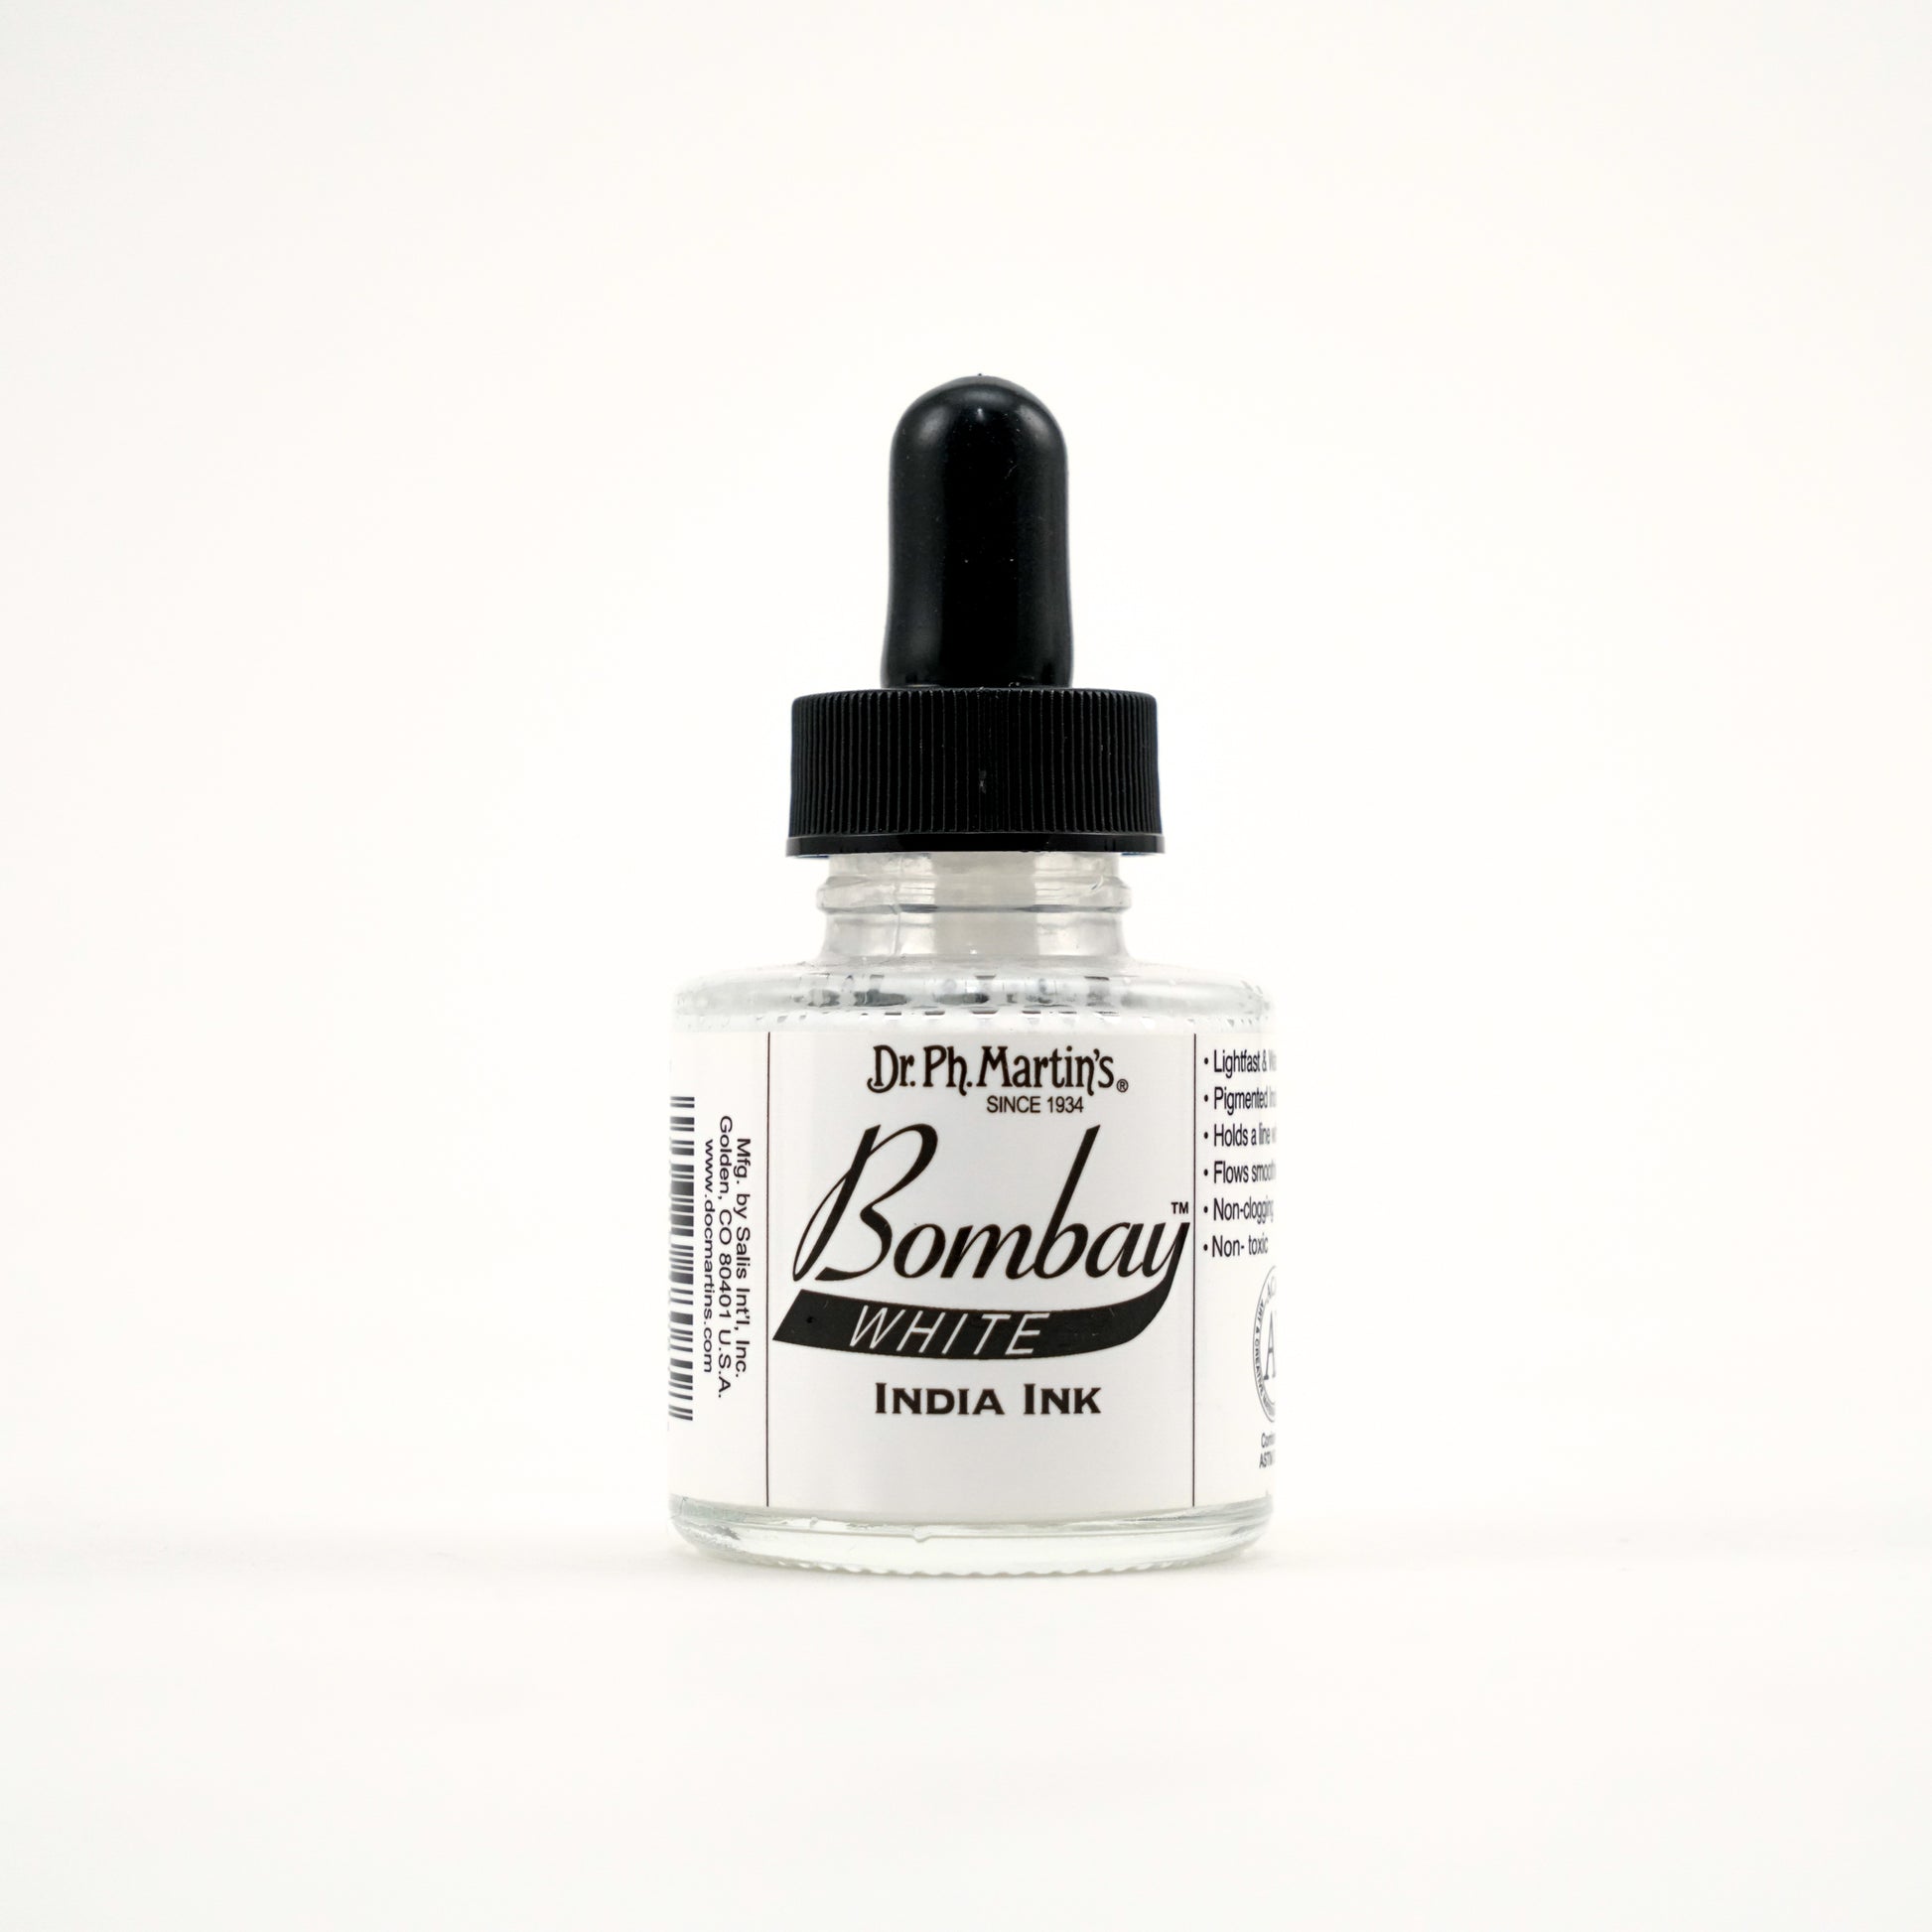 Dr. Ph. Martin's Bombay India Ink - White by Dr. Ph. Martin’s - K. A. Artist Shop